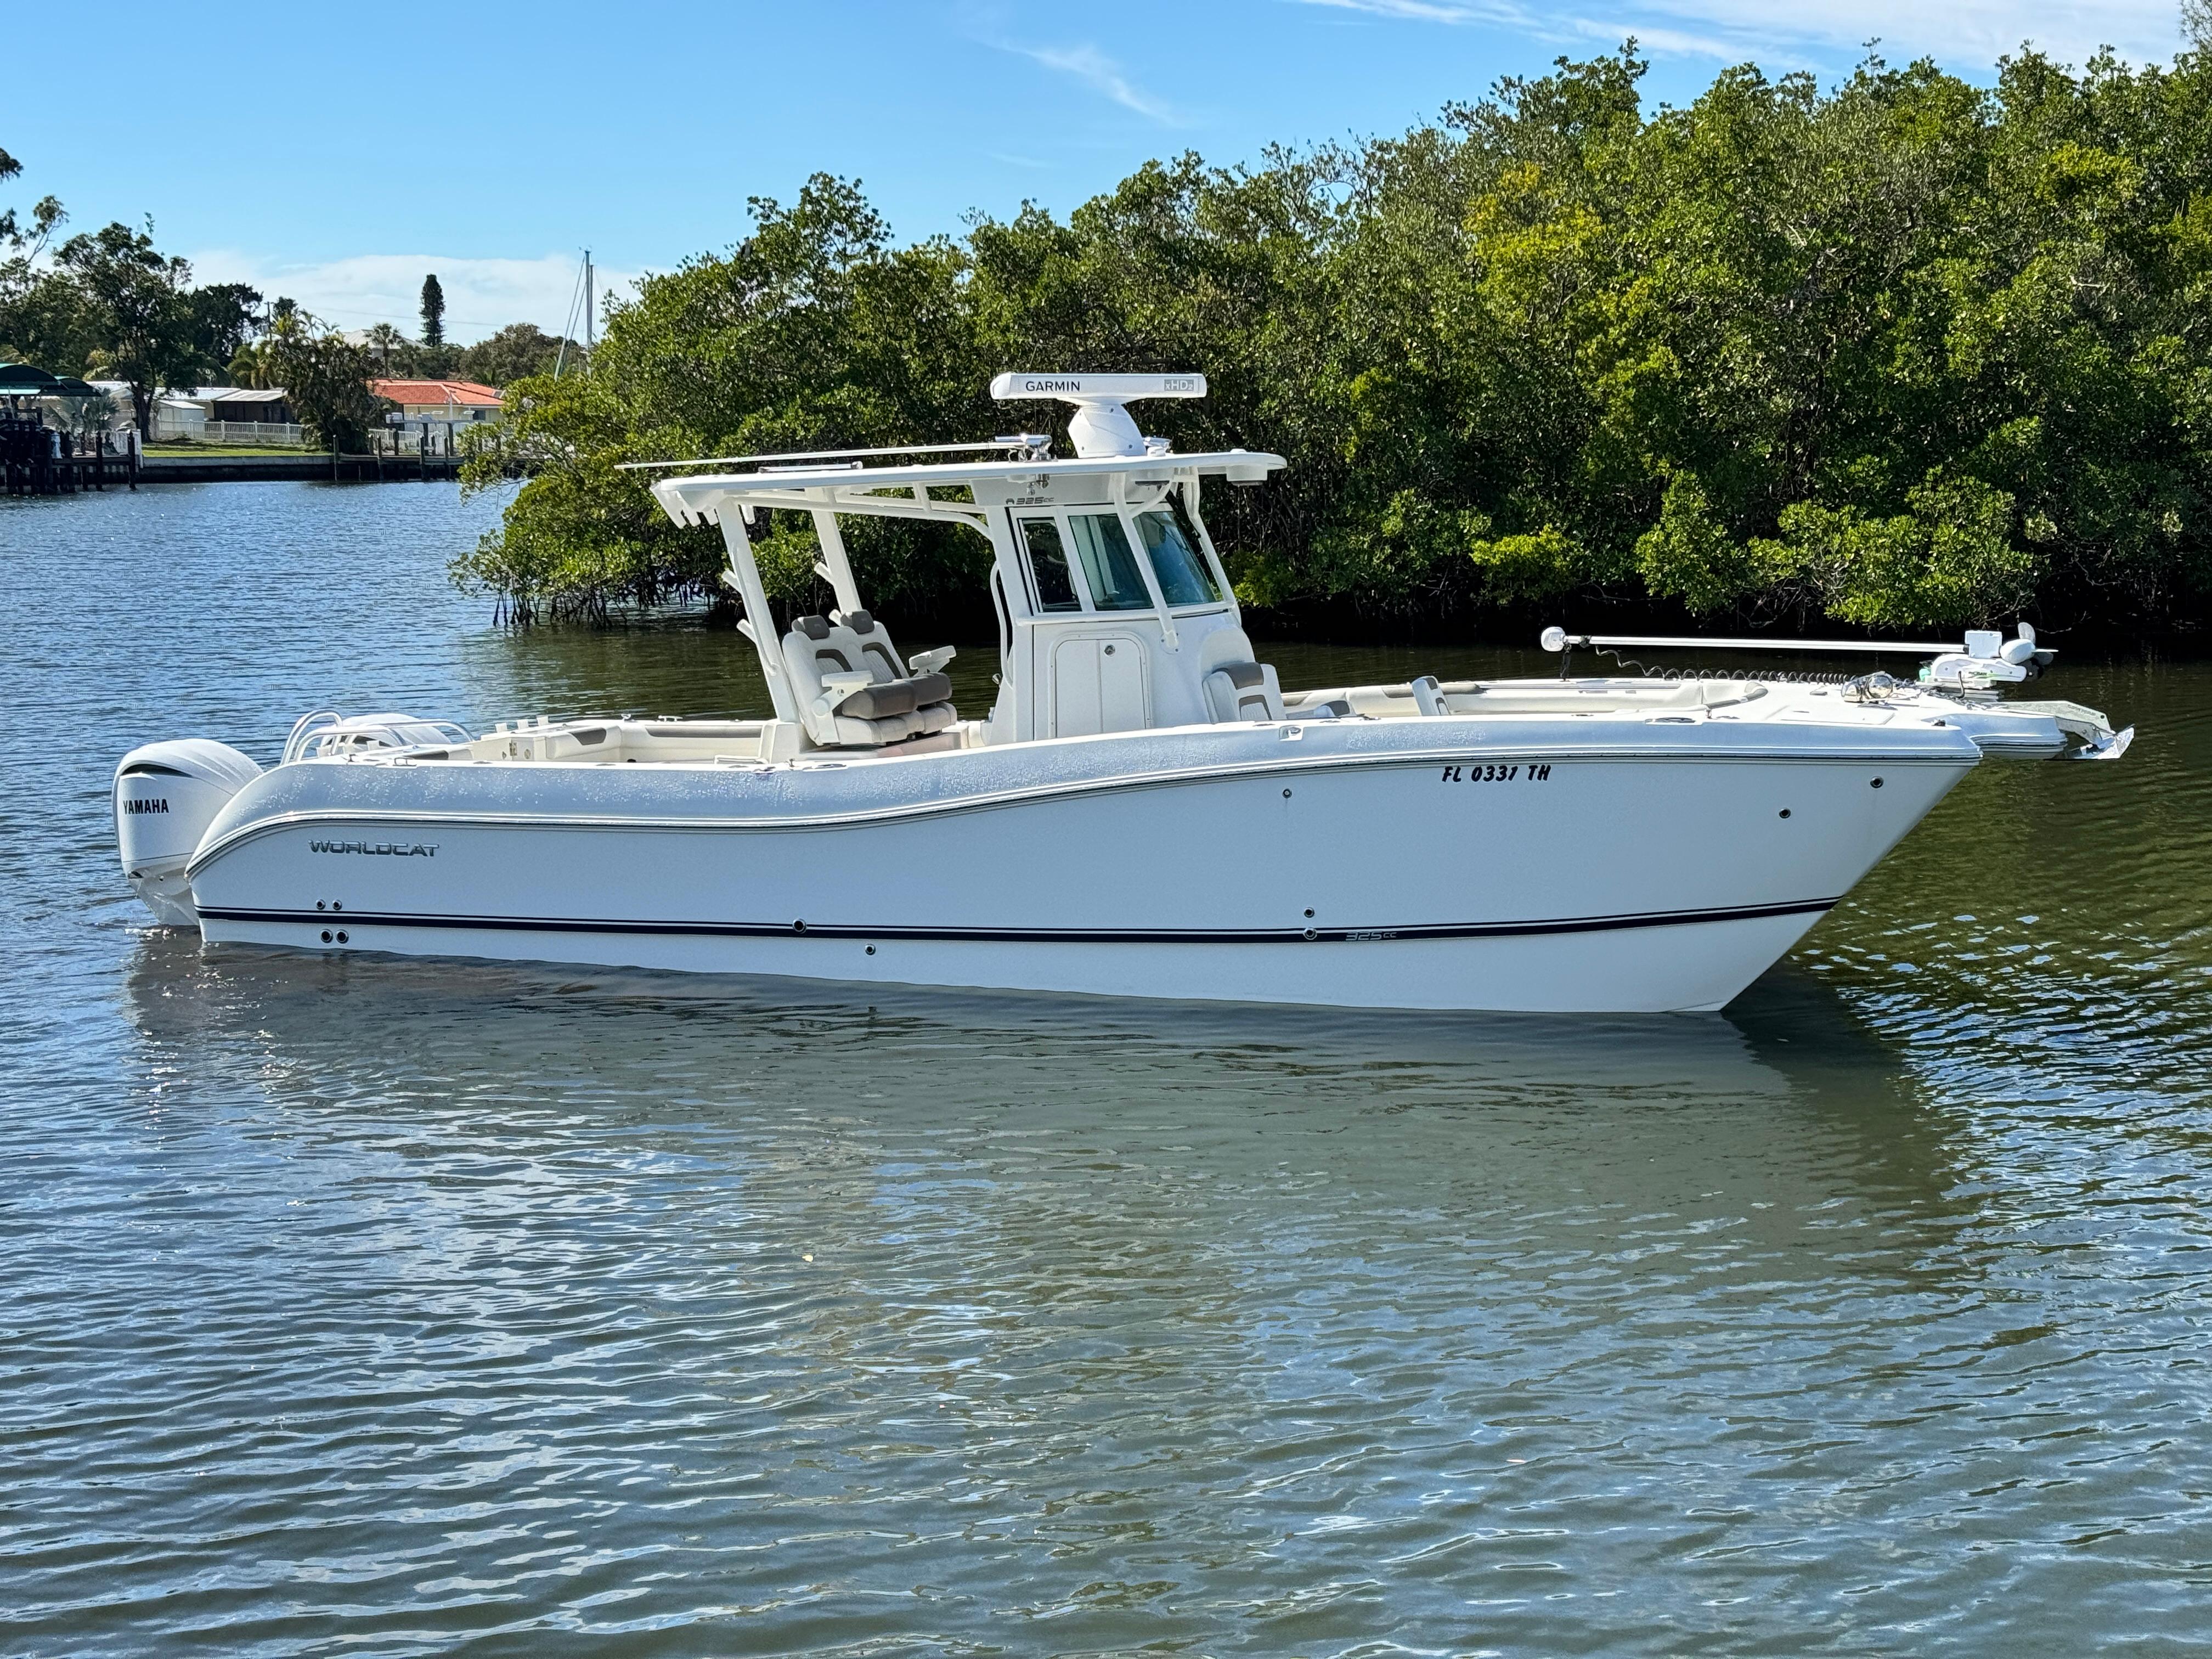 Explore World Cat 320 Cc Boats For Sale - Boat Trader